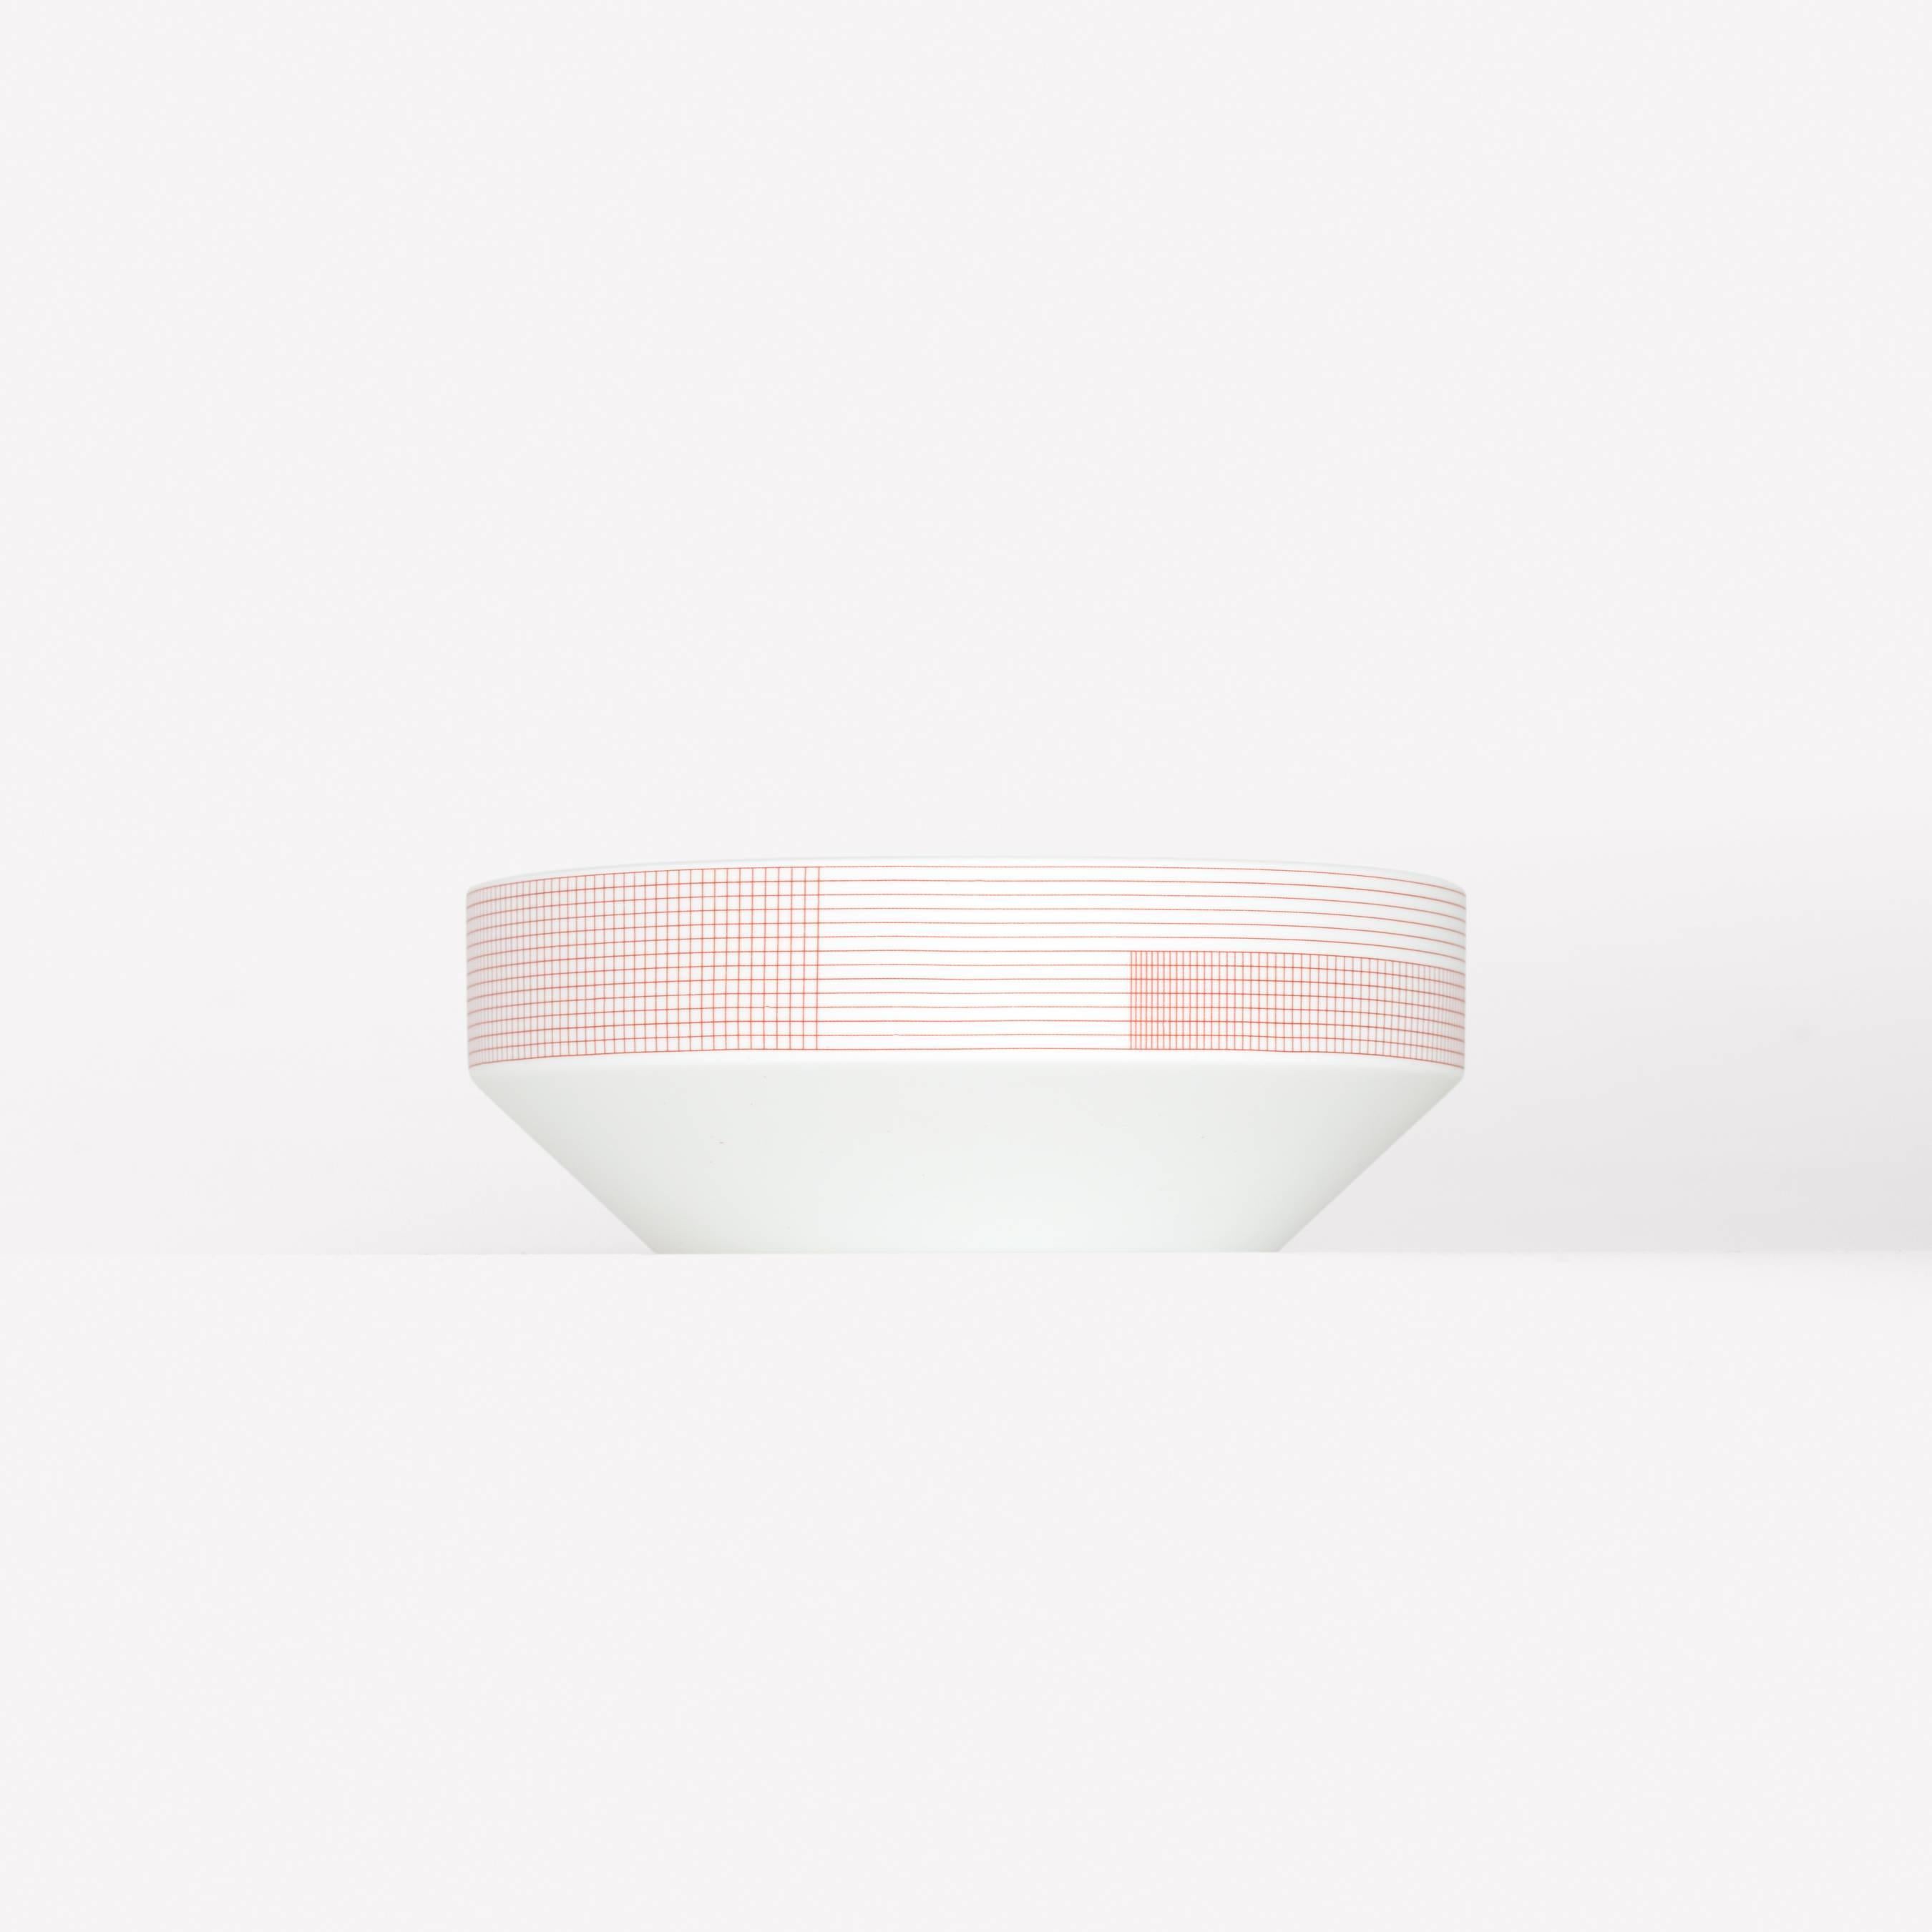 Pattern Porcelain Bowl by Scholten & Baijings
002 Petal

Porcelain with Grid textile graphic. Matte exterior with gloss interior. Made in Japan by 1616 / arita japan. 

Dishwasher safe.

Scholten & Baijings for Maharam is a collection of home